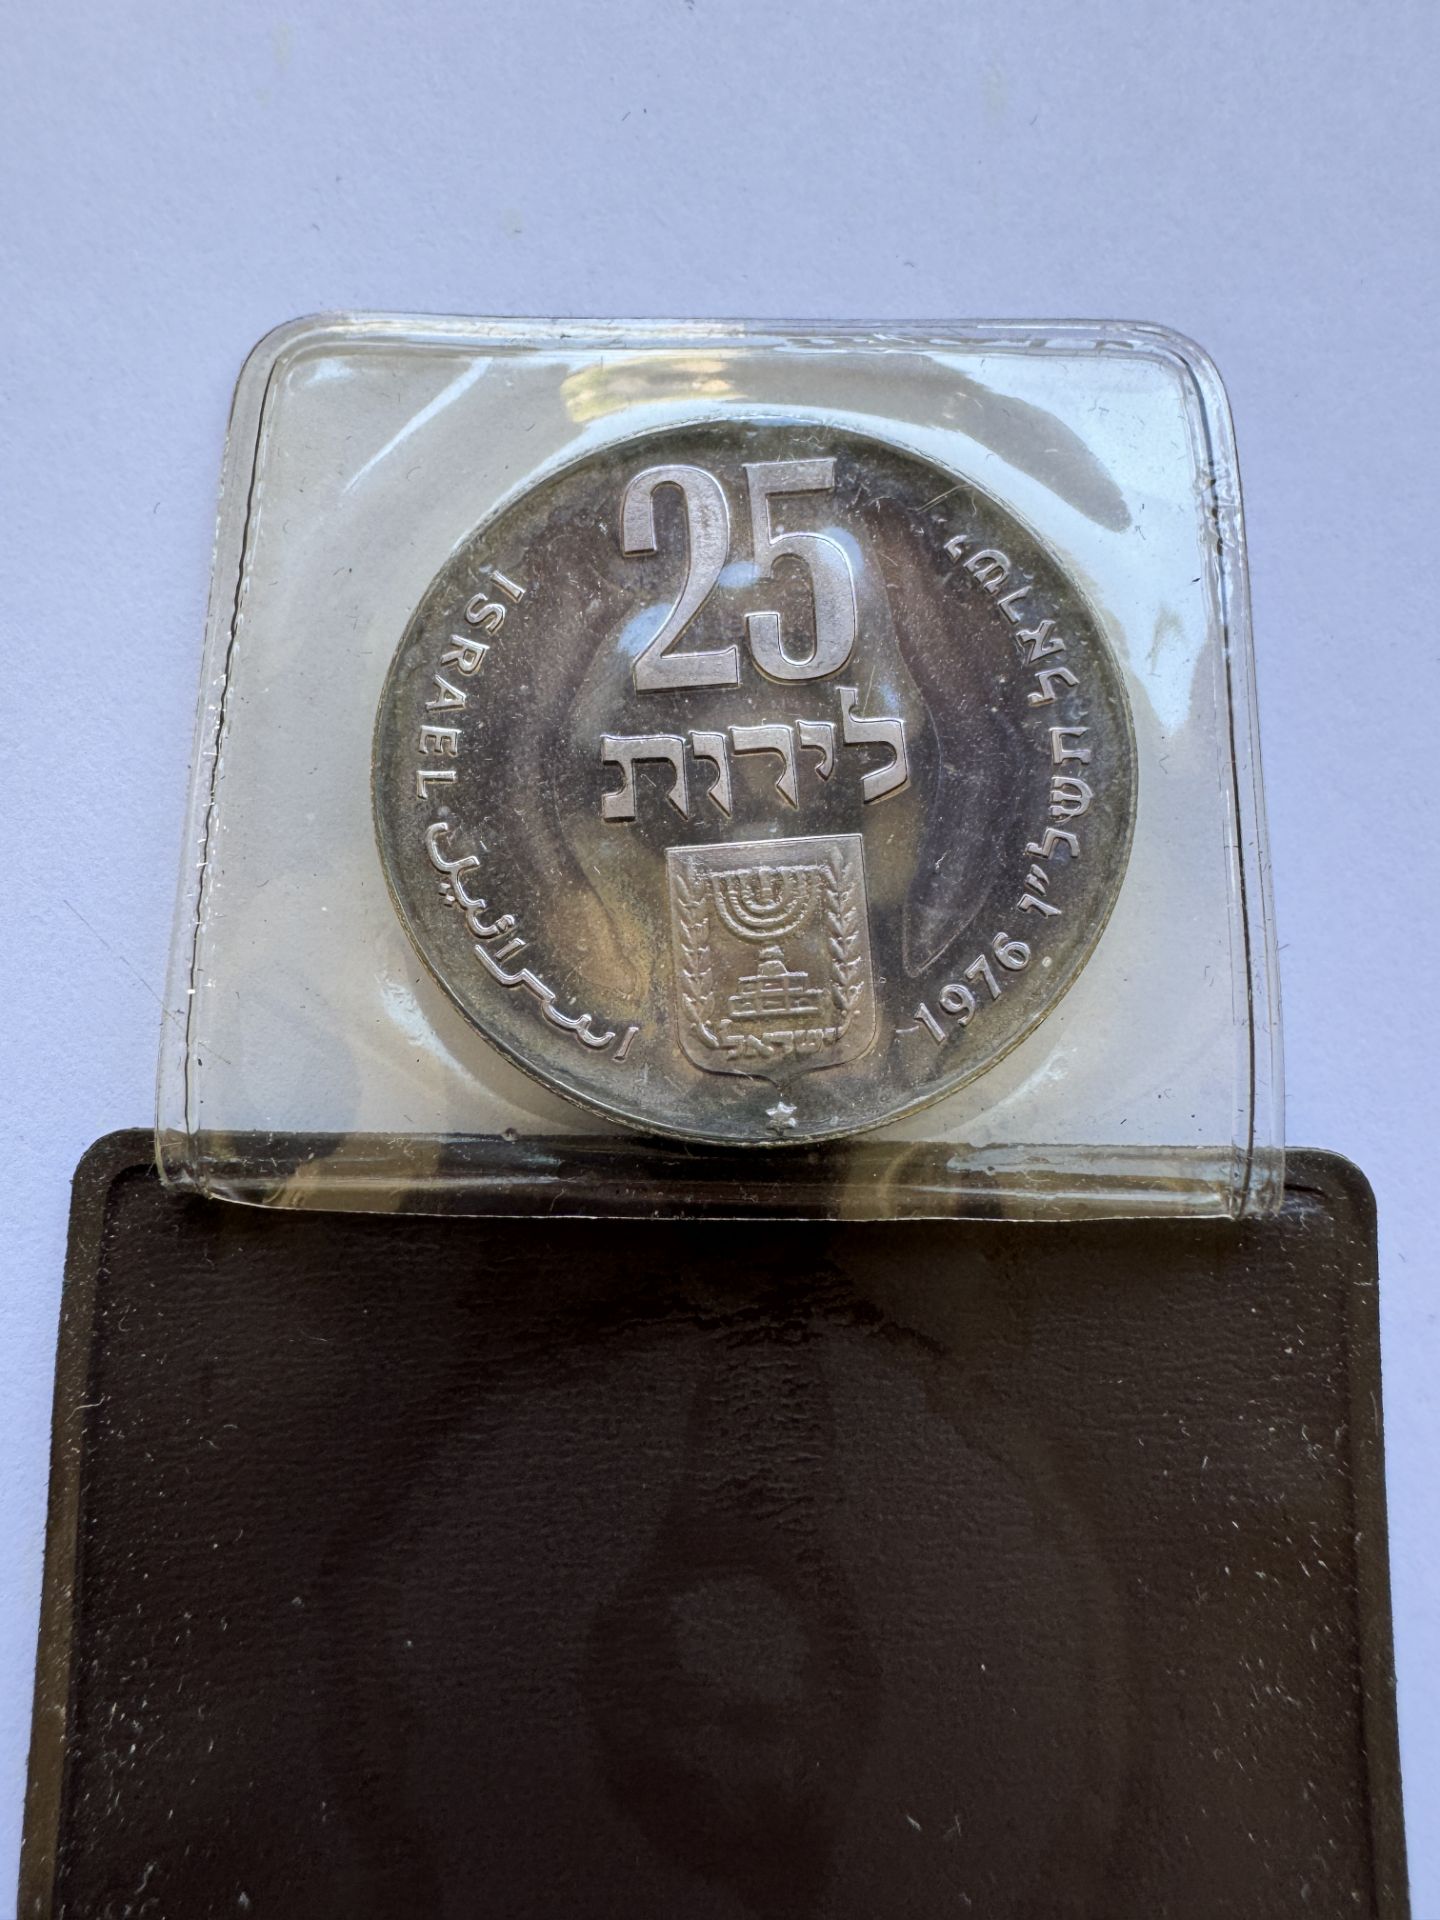 1976 ISRAEL 25 LIROT COIN - 28TH ANNIVERSARY OF INDEPENDENCE - Image 2 of 2